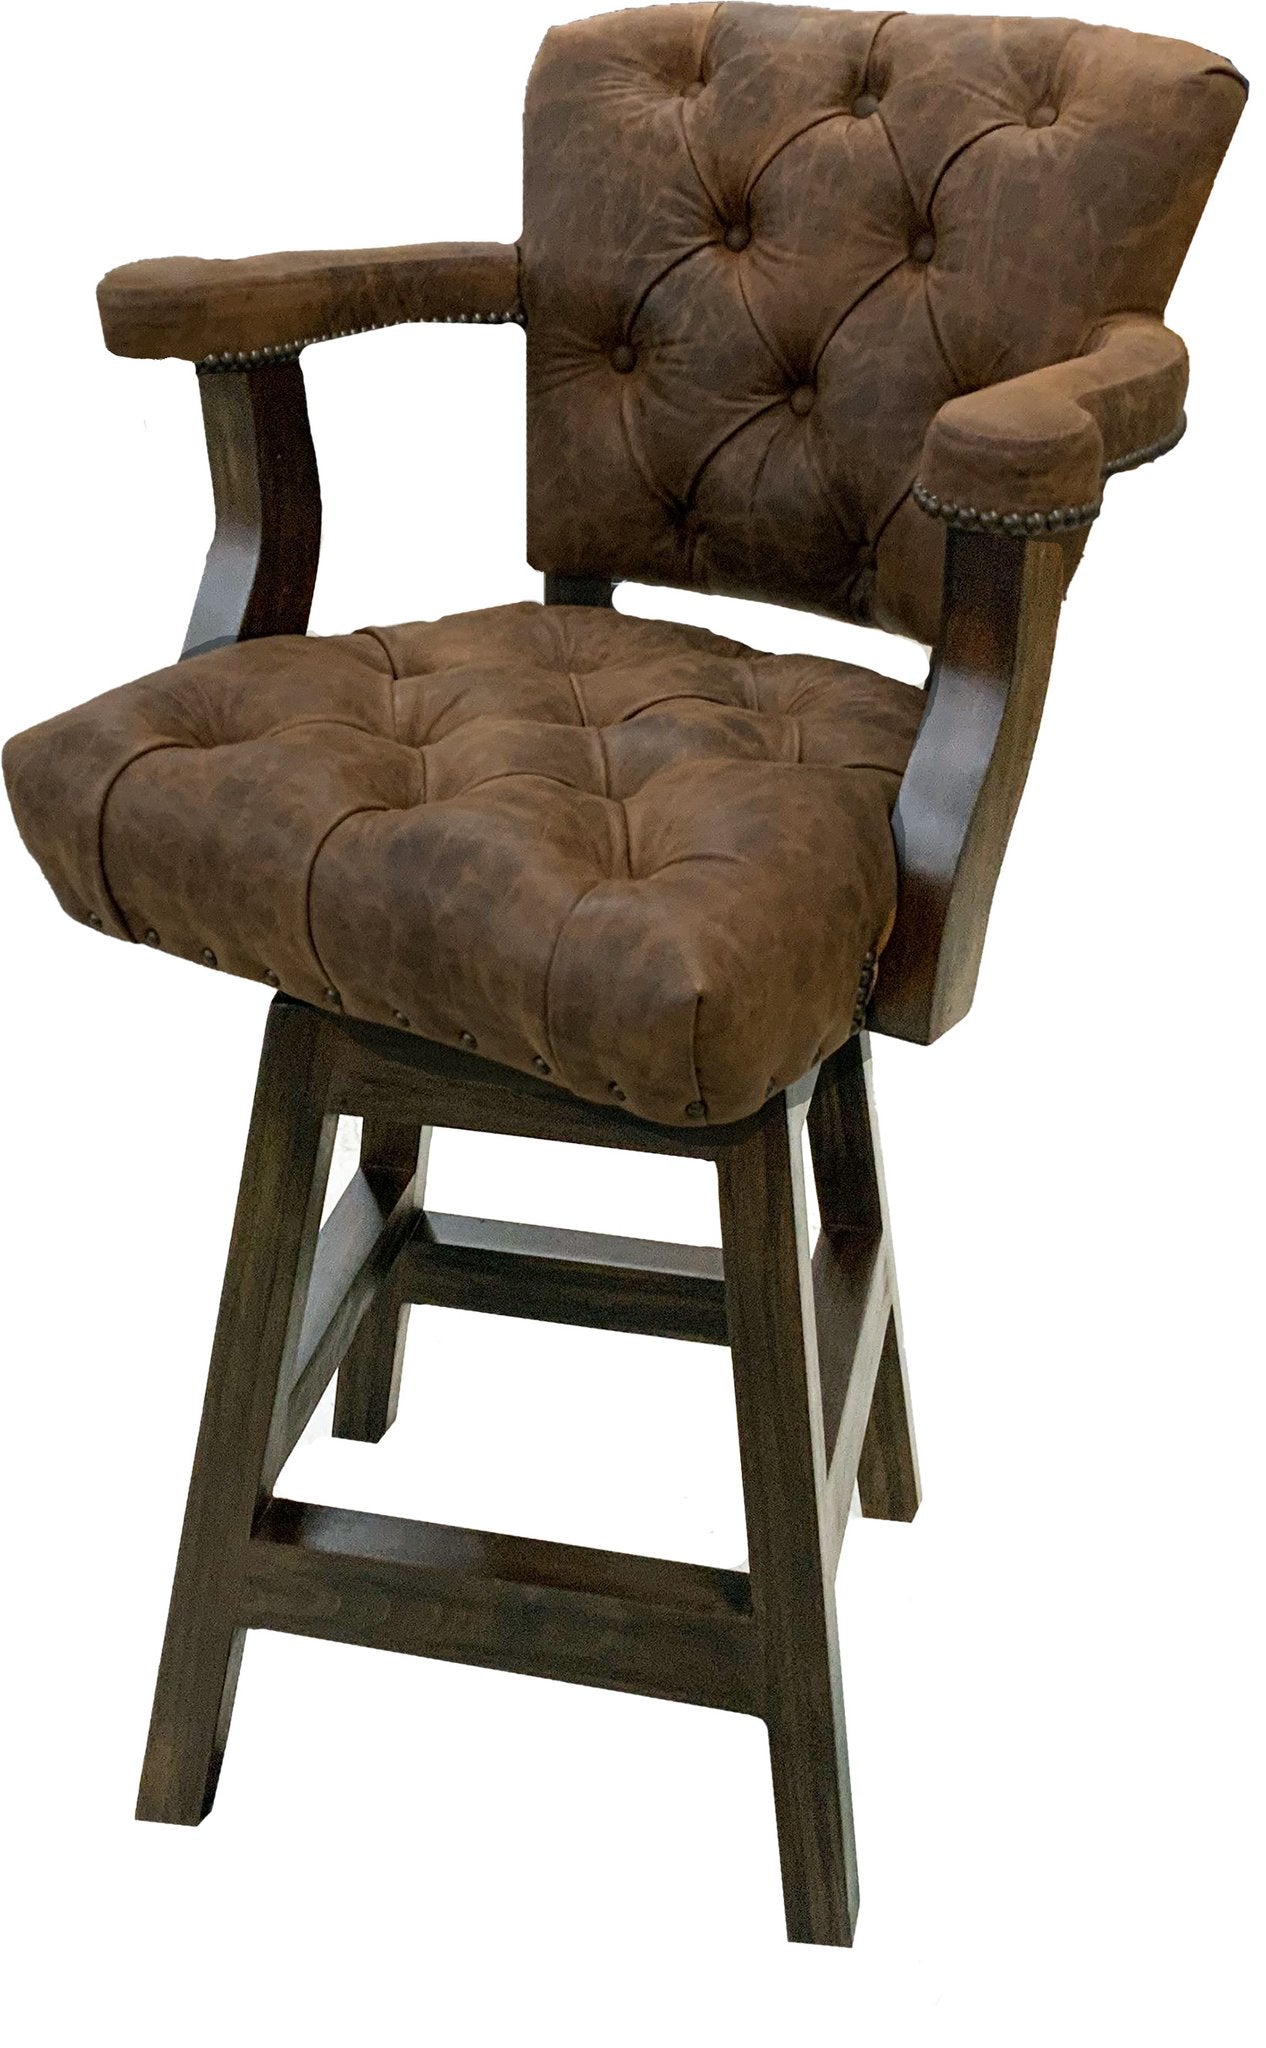 Pecan Axis Tufted Western Barstool